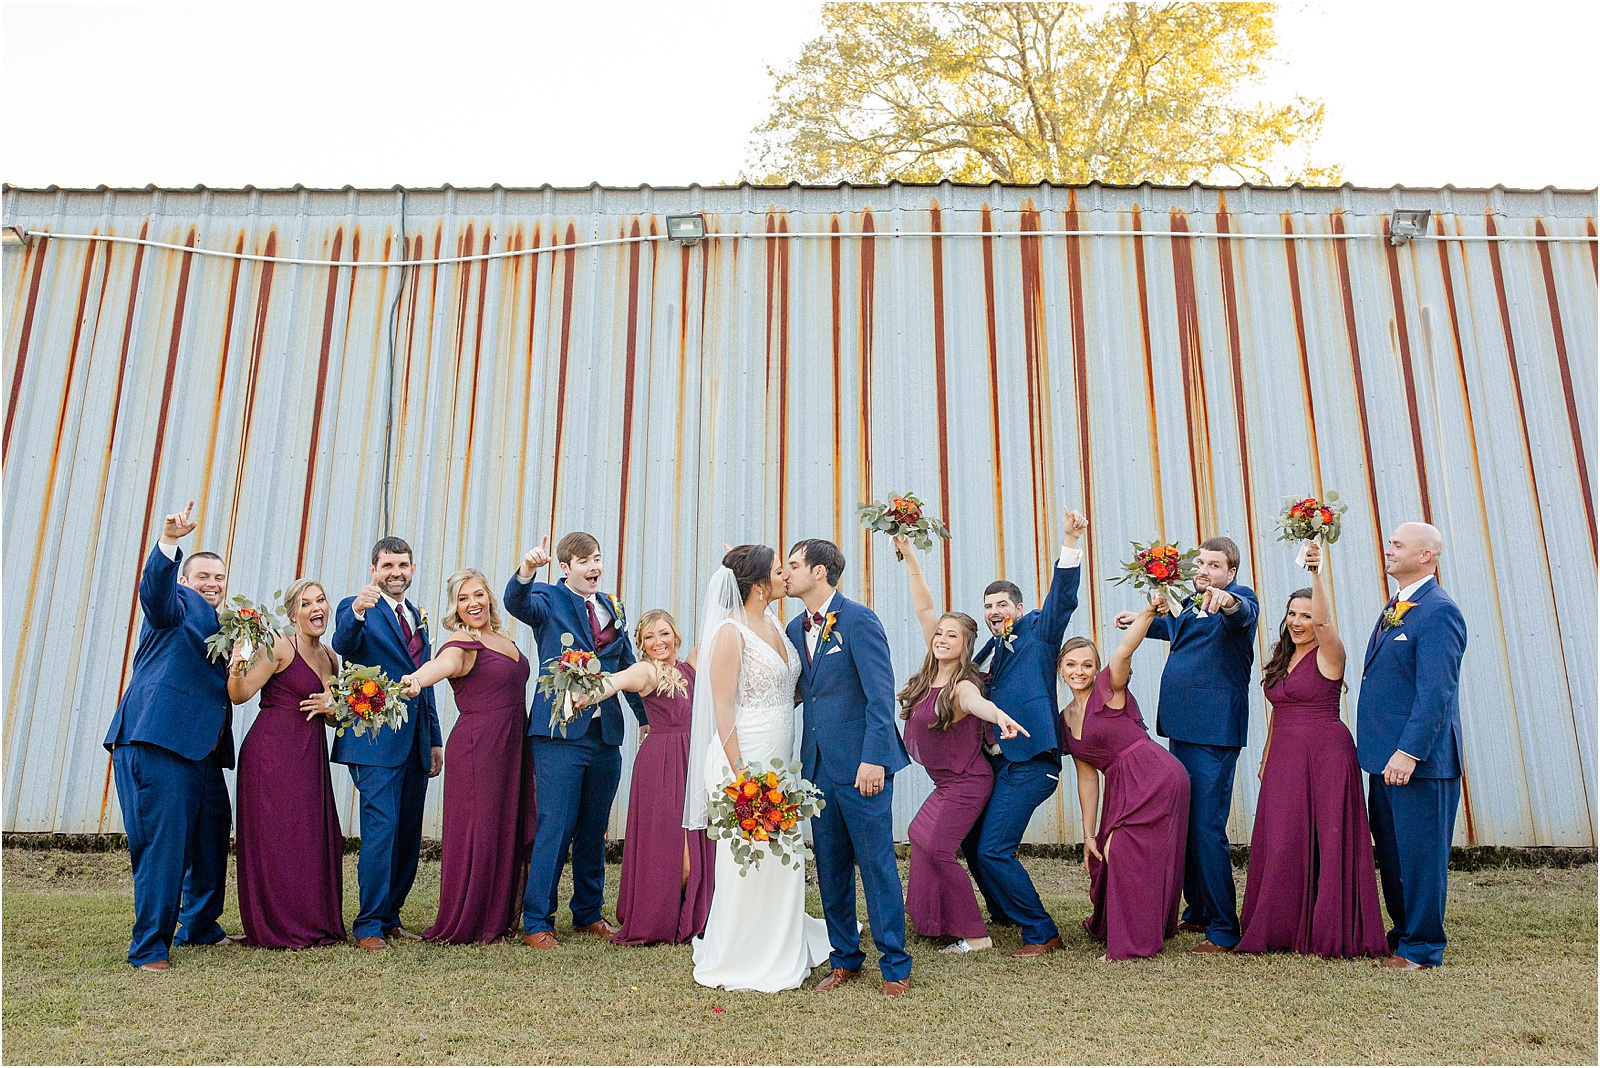 groomsmen and bridesmaids celebrating while bride and groom share a kiss